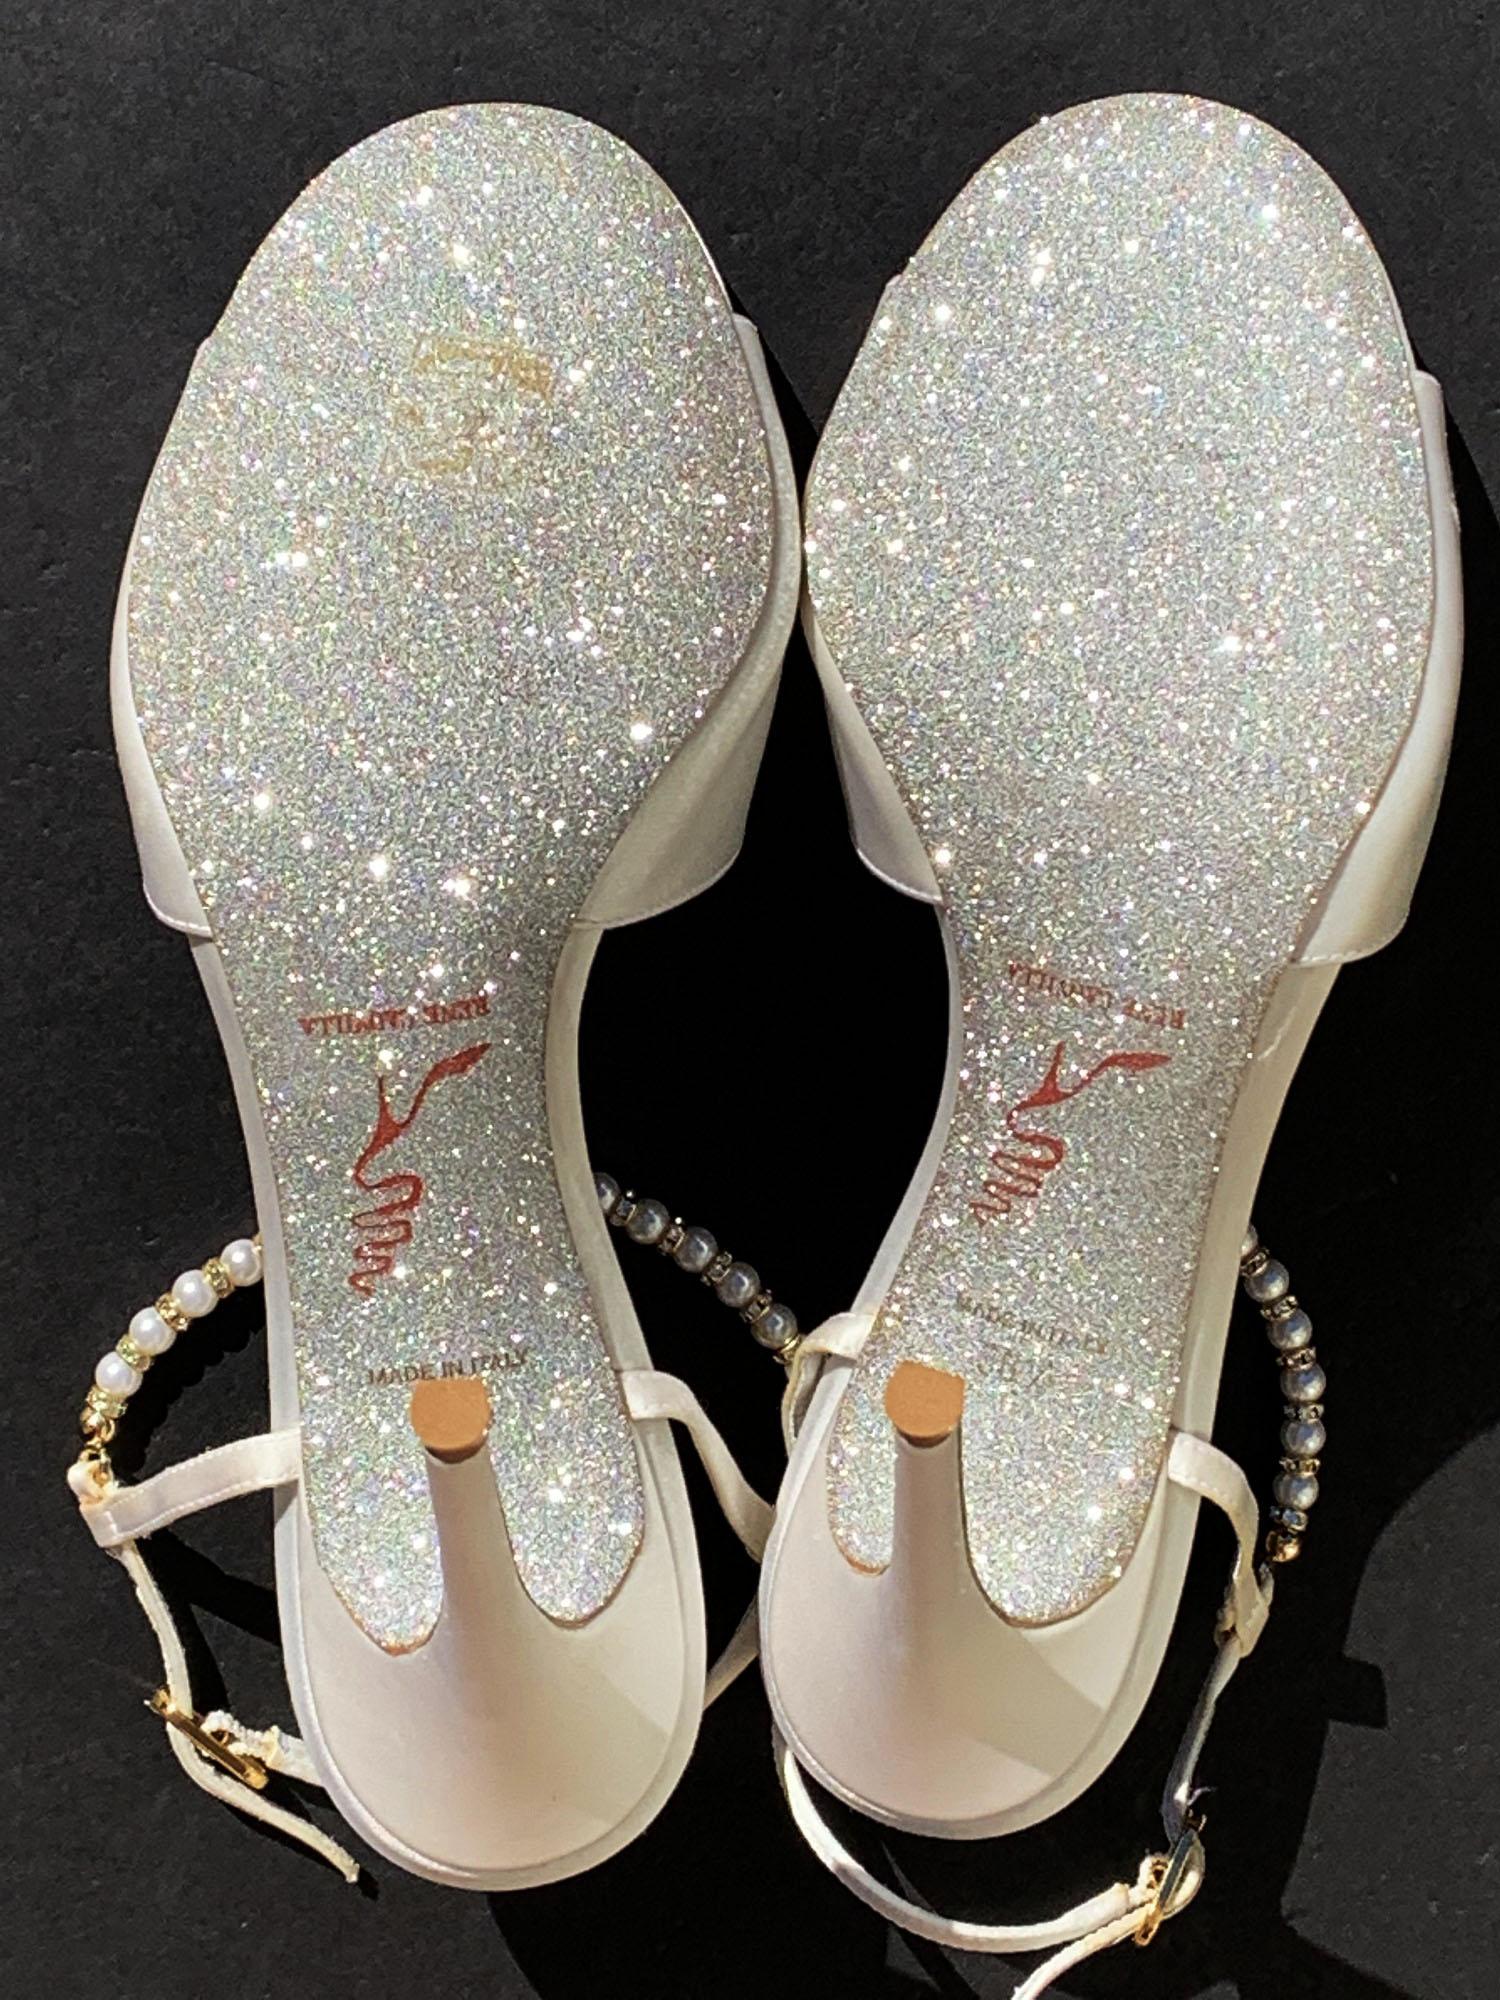 Gray New Rene Caovilla White Satin Pearl Crystal Sandals 36.5 - US 6.5 For Sale